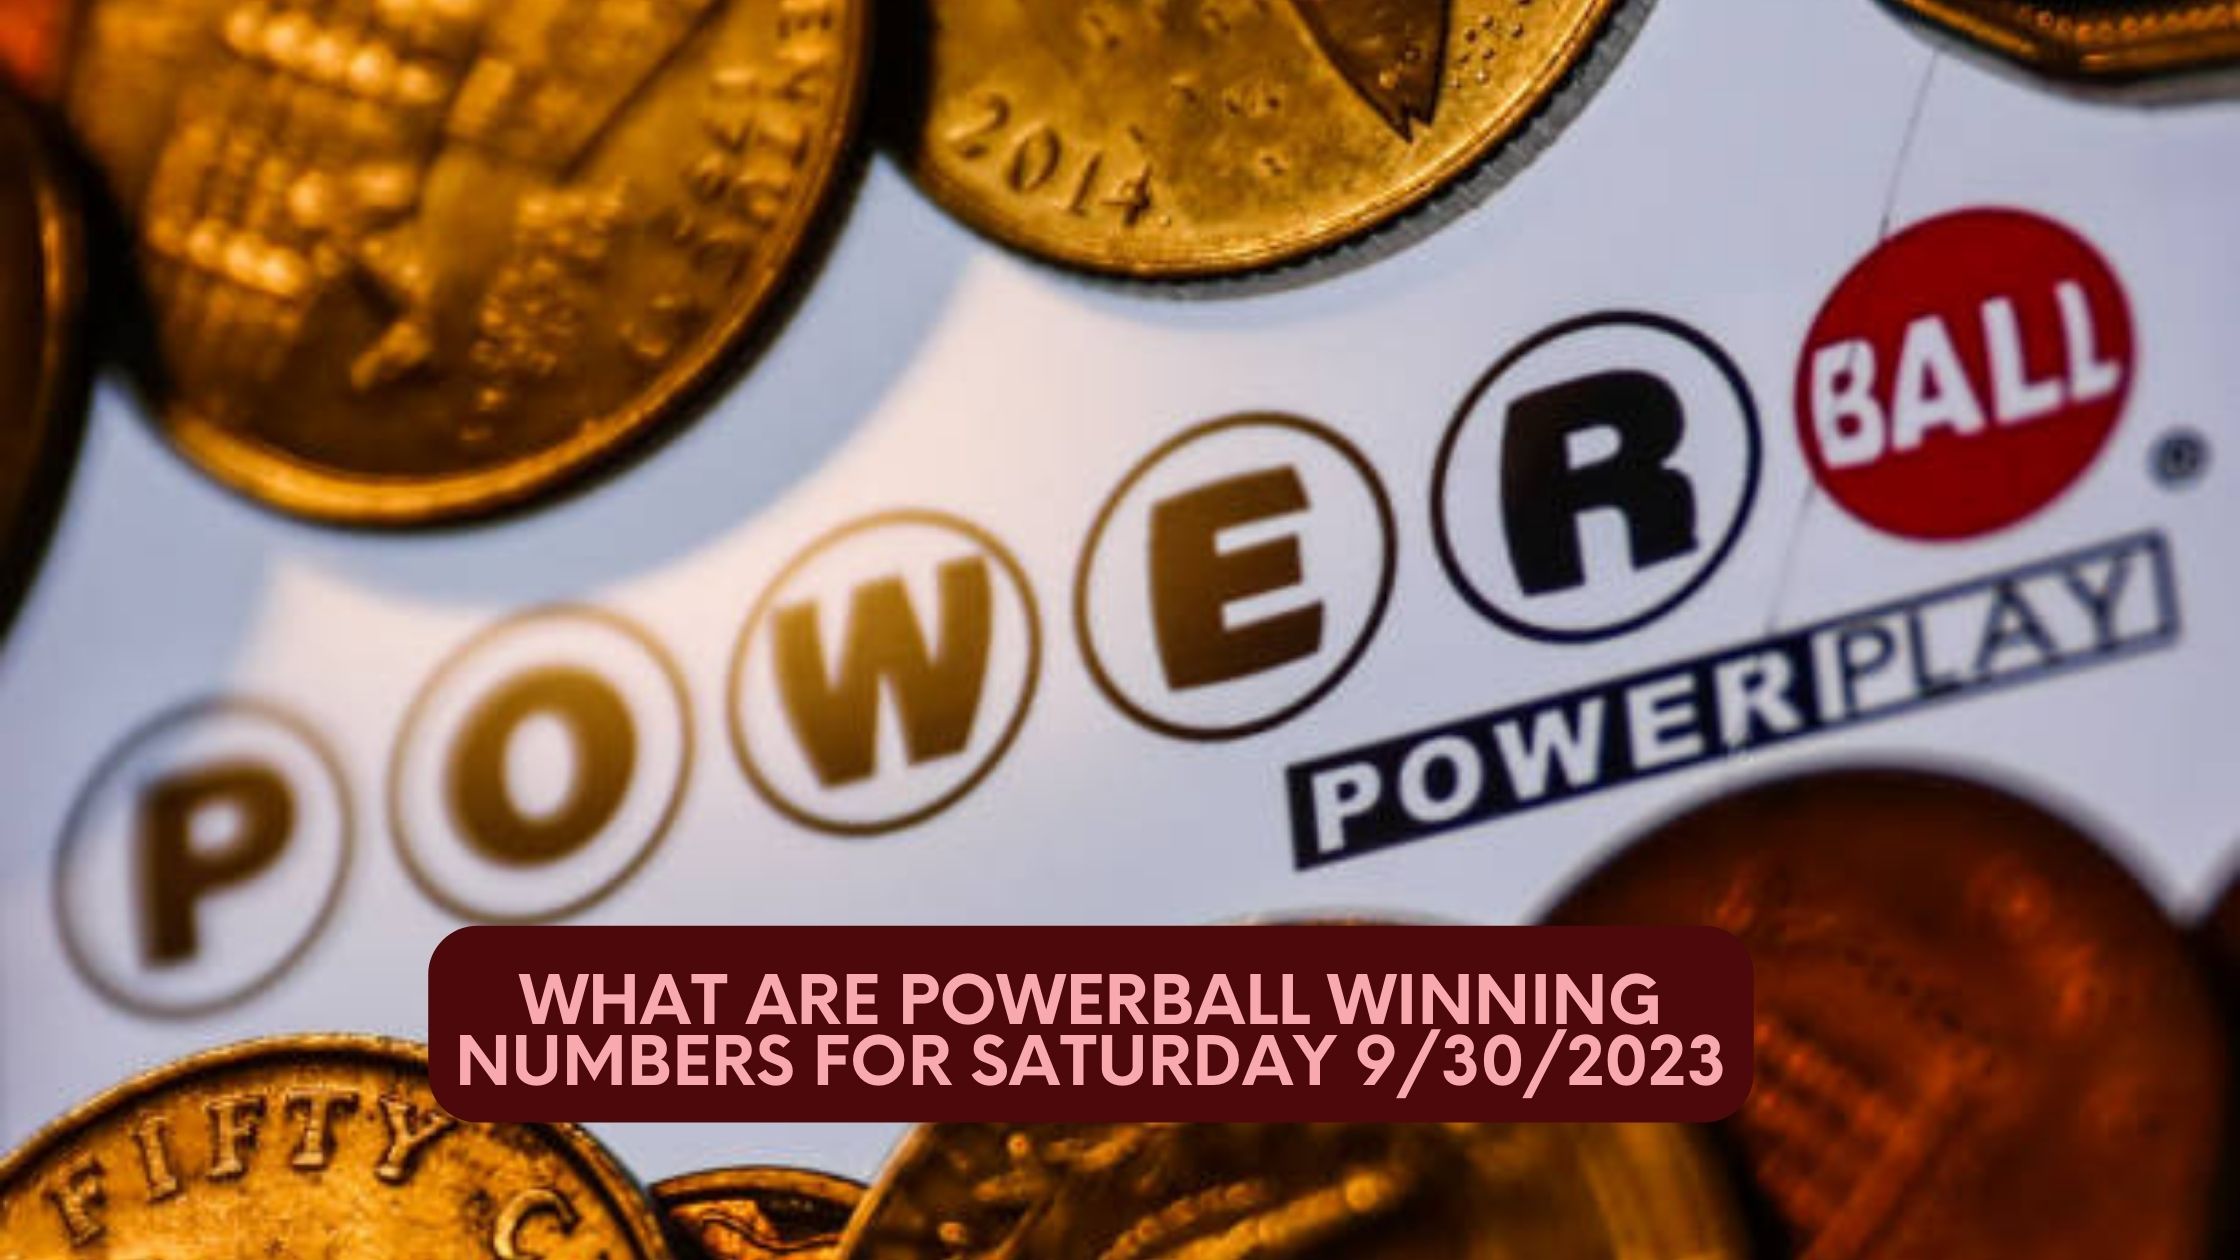 What are Powerball winning numbers for Saturday 9/30/2023